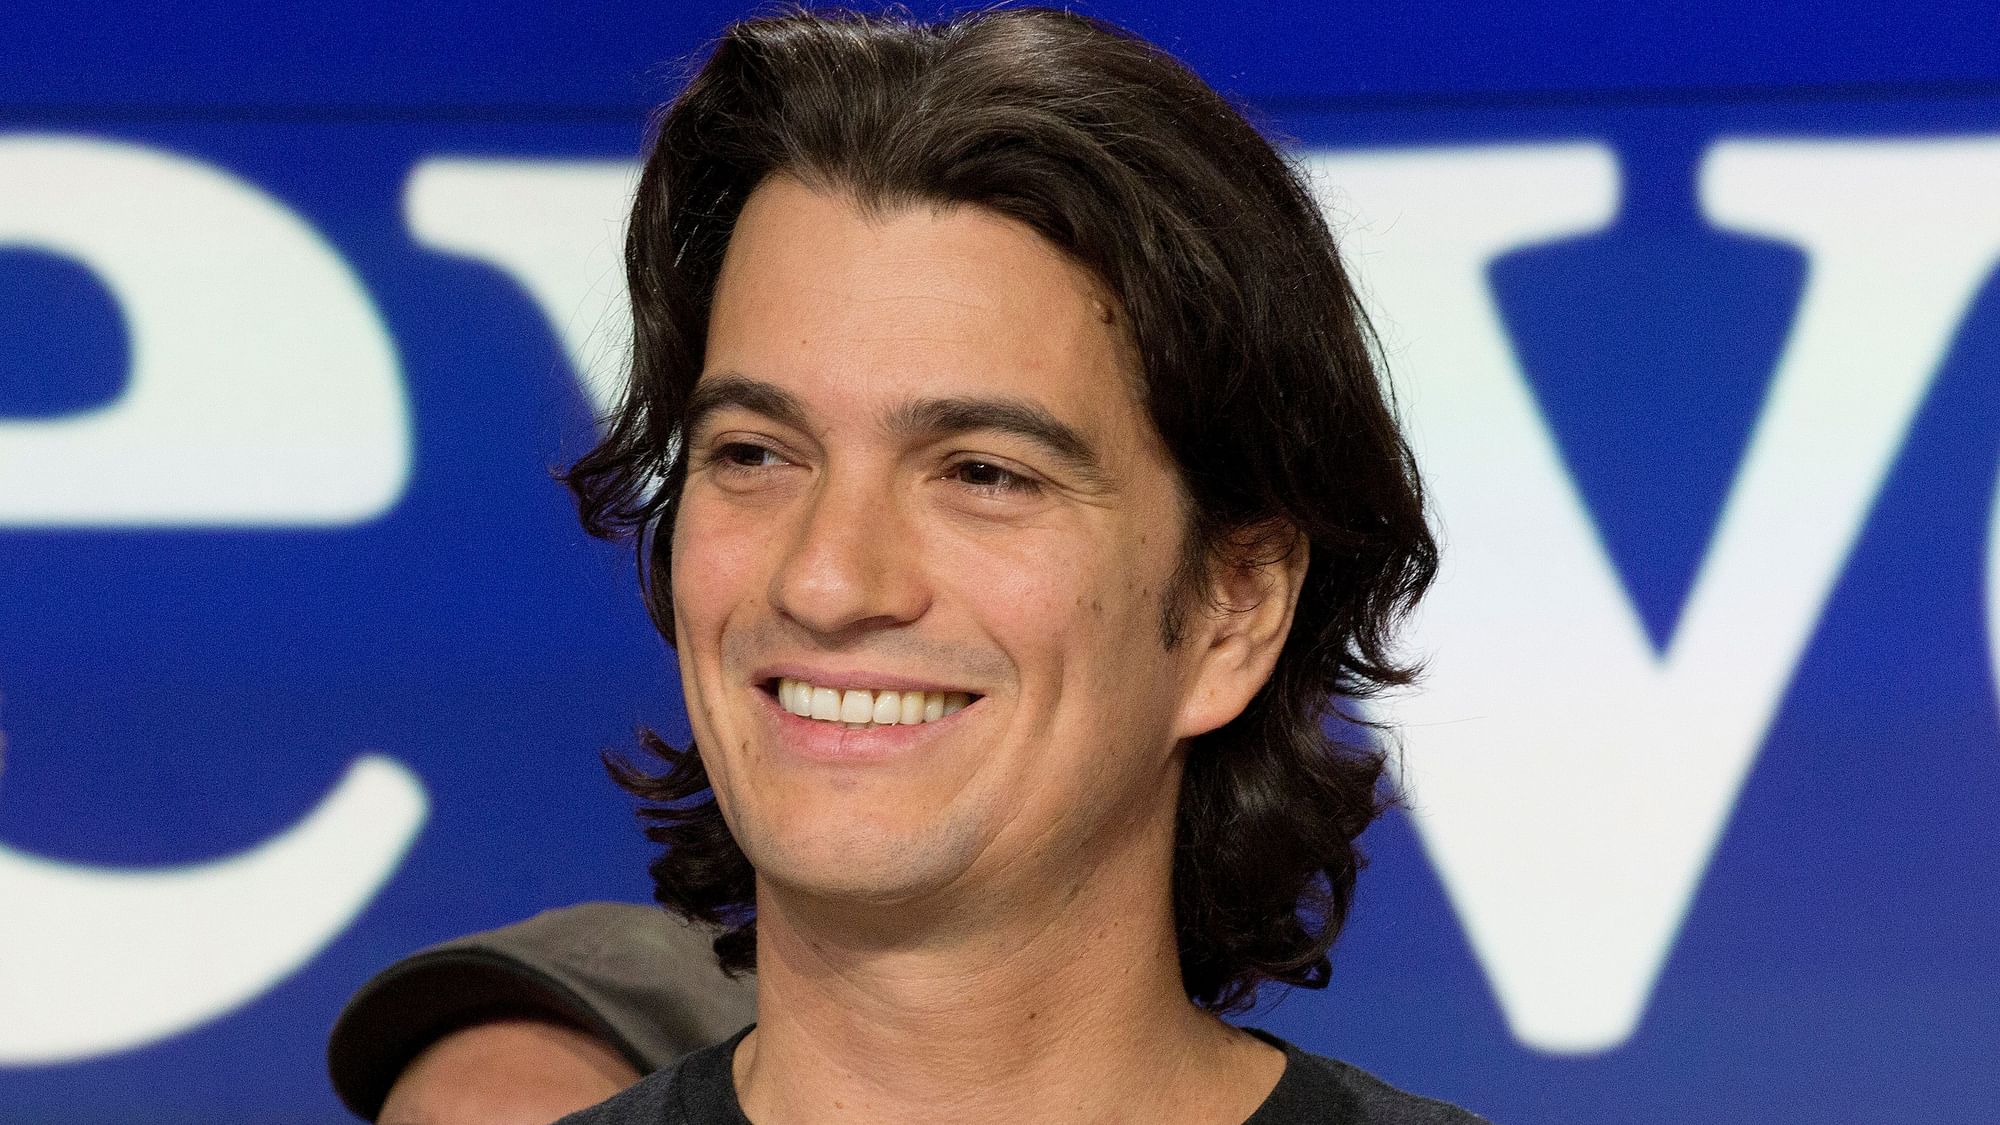 Adam Neumann, co-founder and CEO of WeWork.